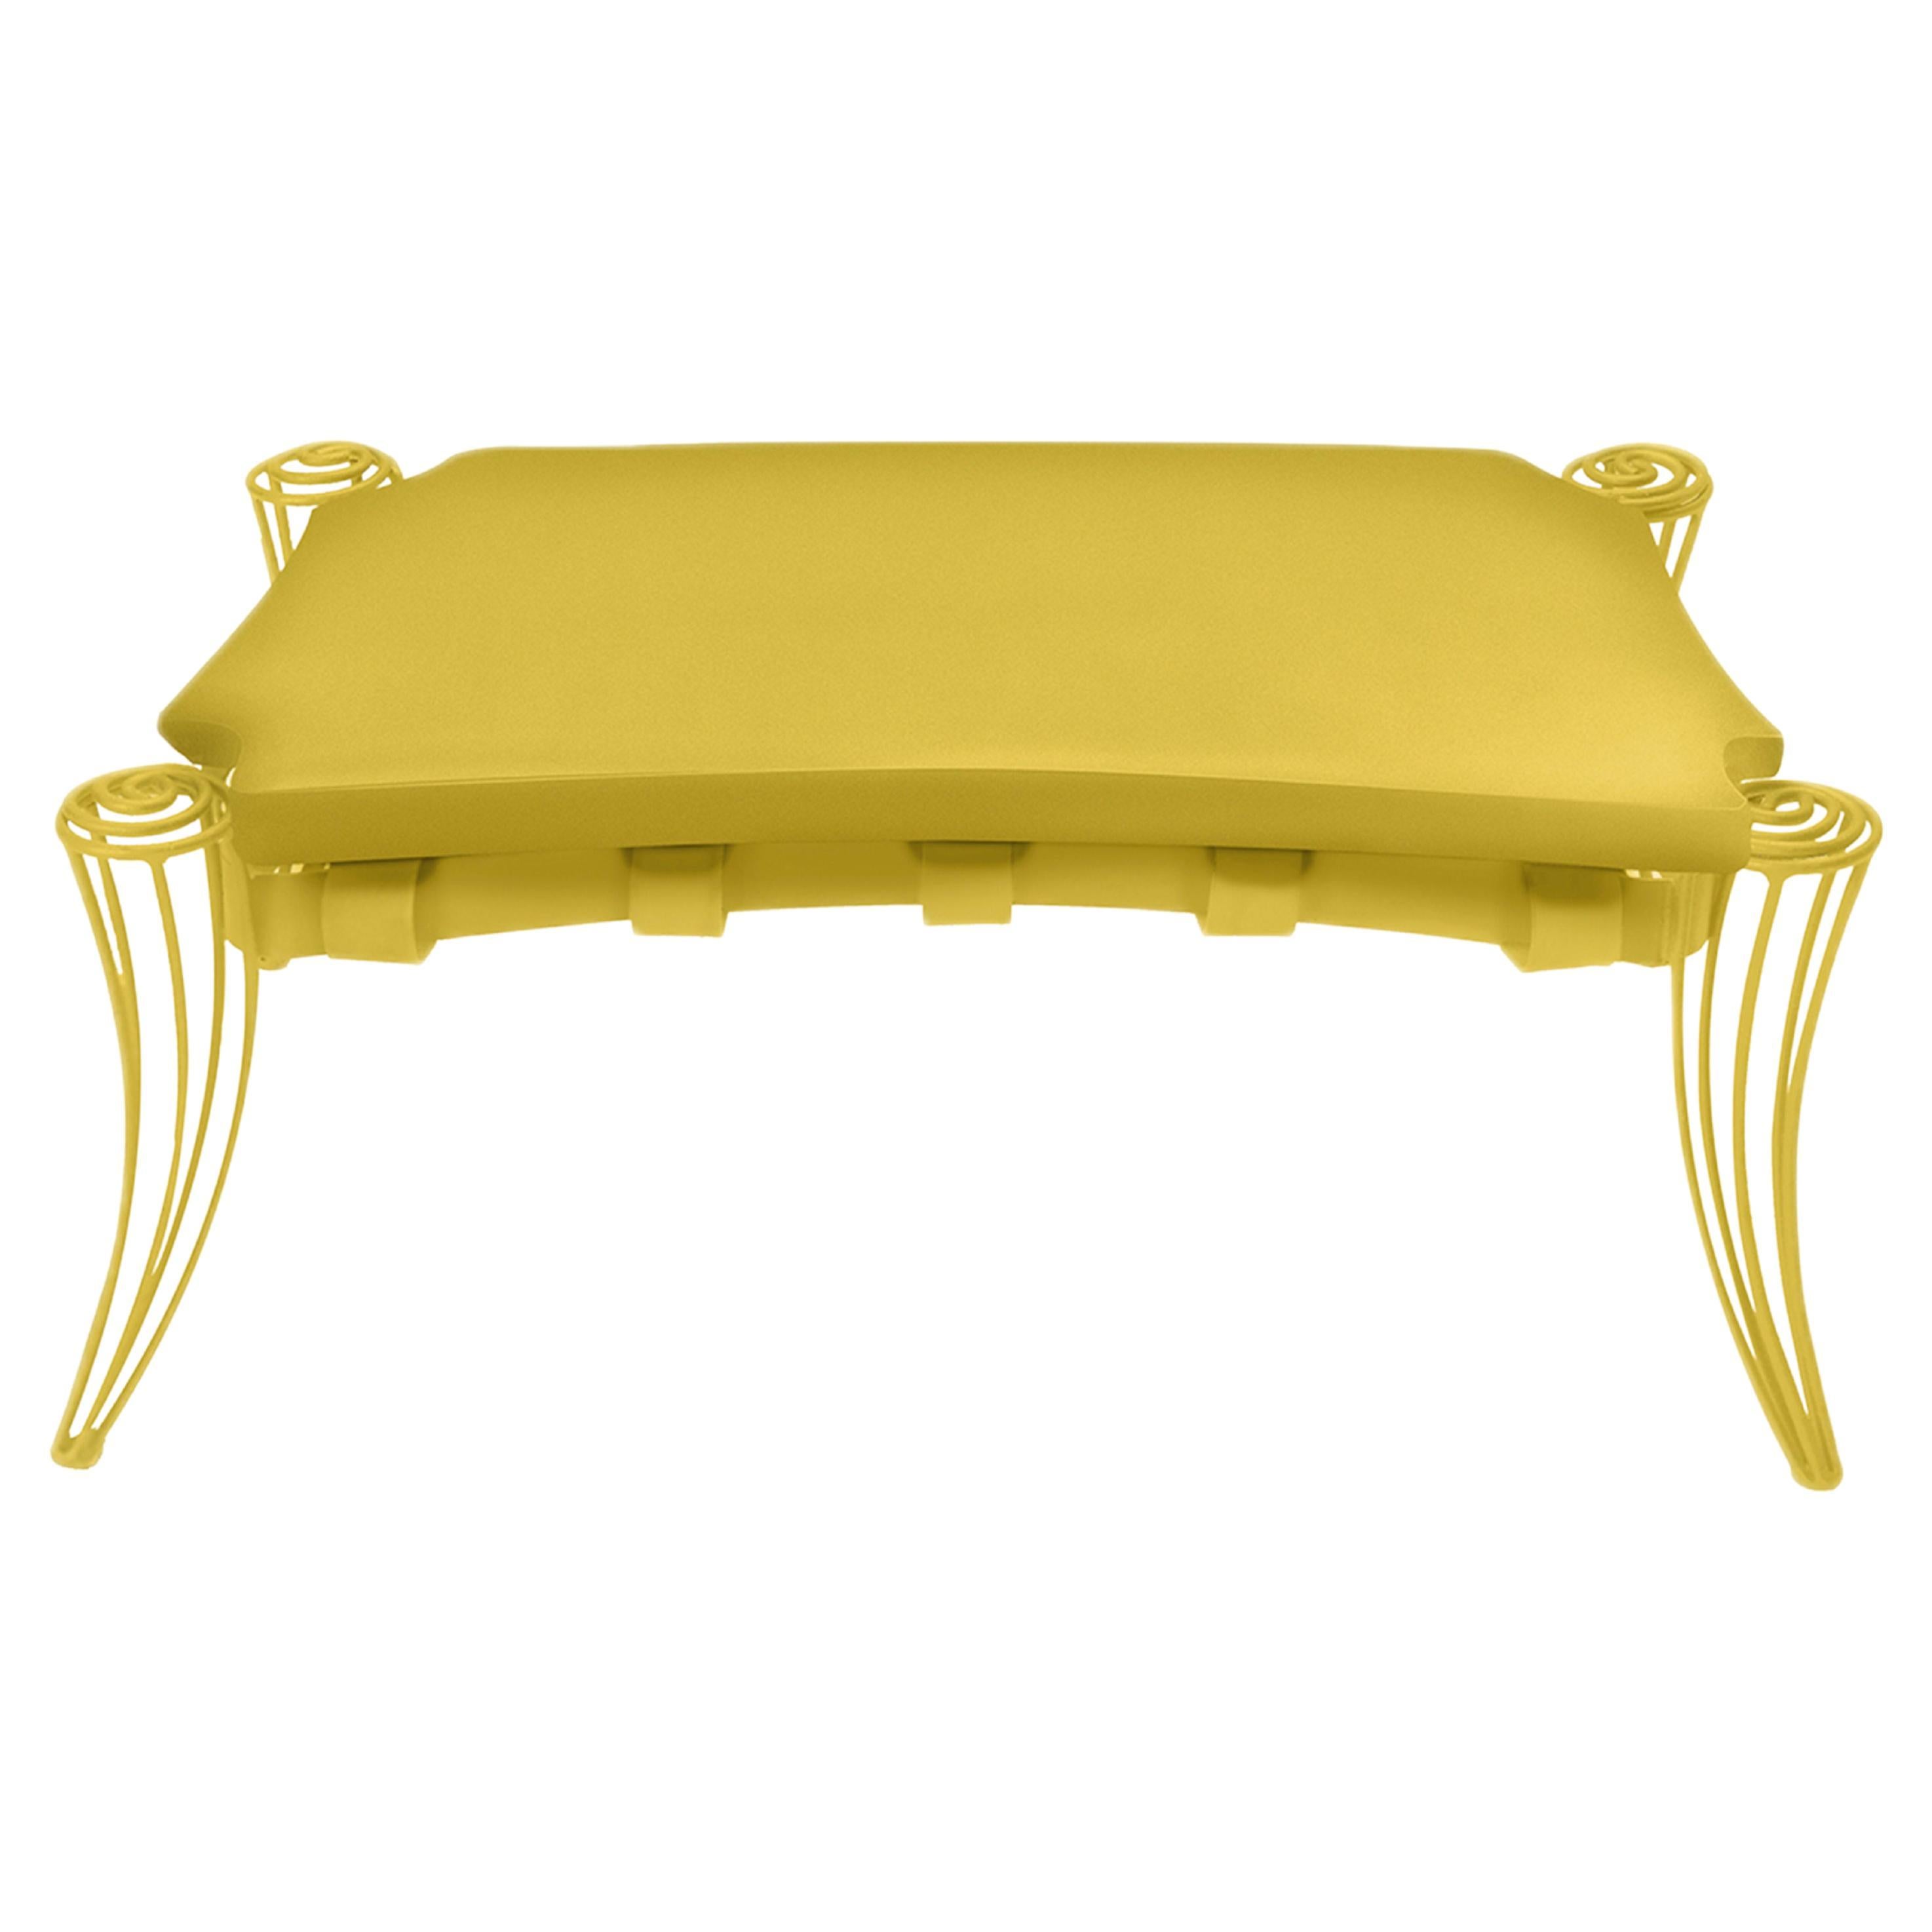 Opus Yellow Garden Pouf by Carlo Rampazzi For Sale